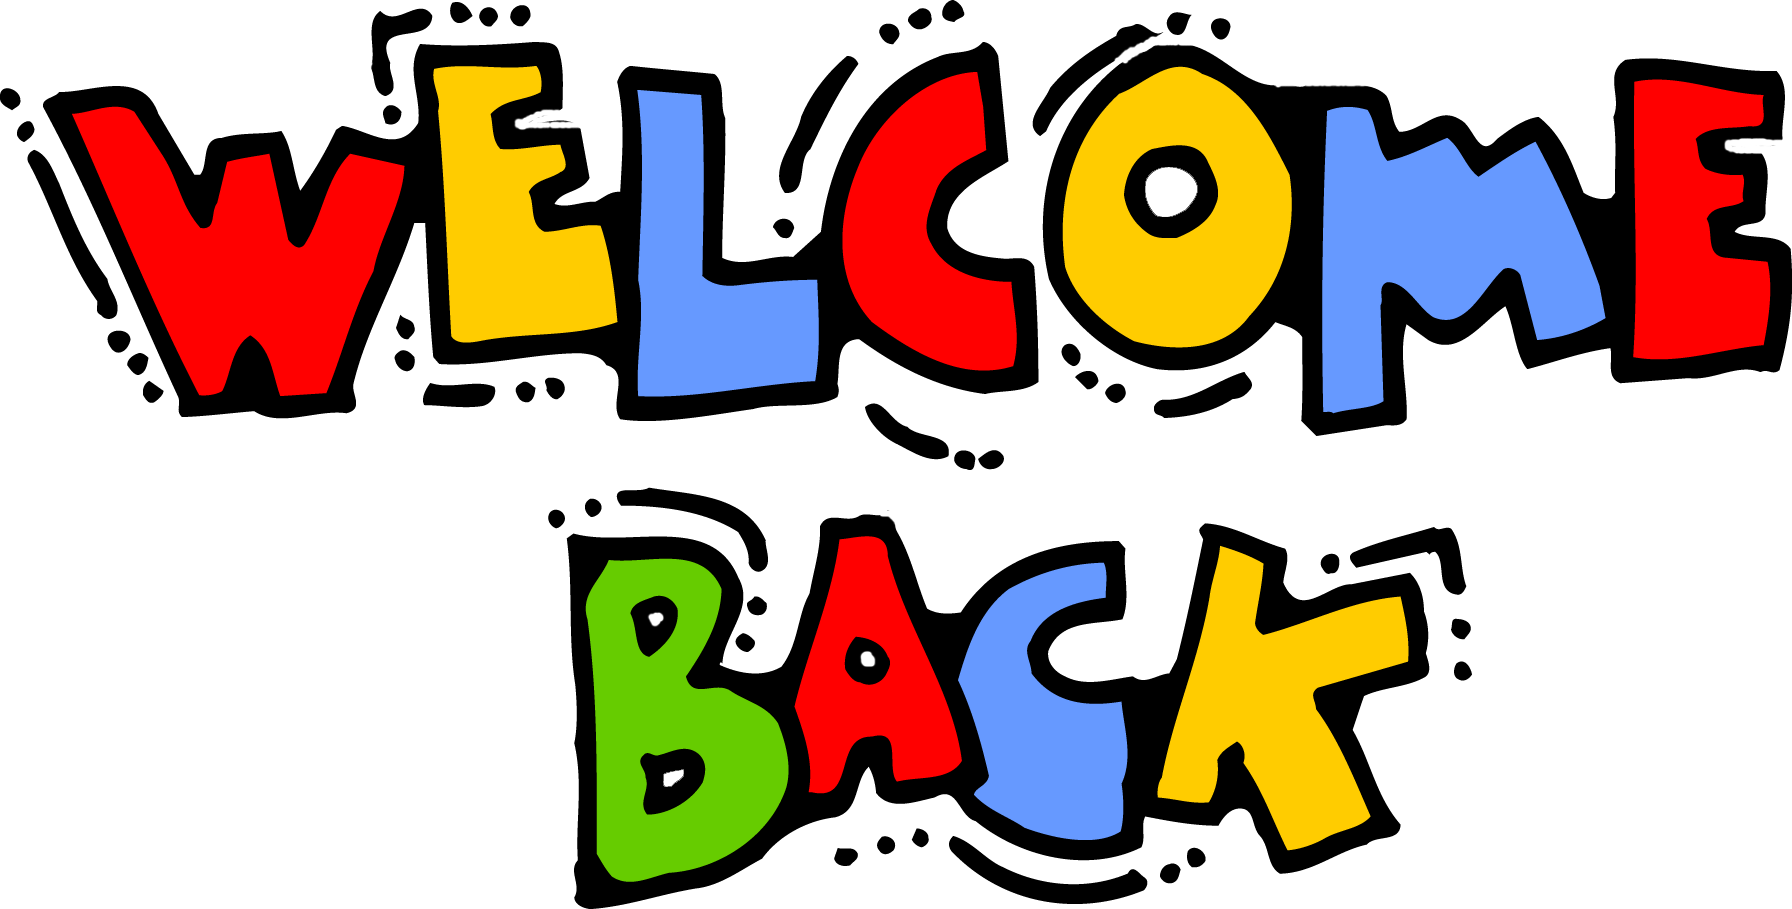 https://askgramps.org/files/2009/03/Welcome-back-graphics-clipart.png